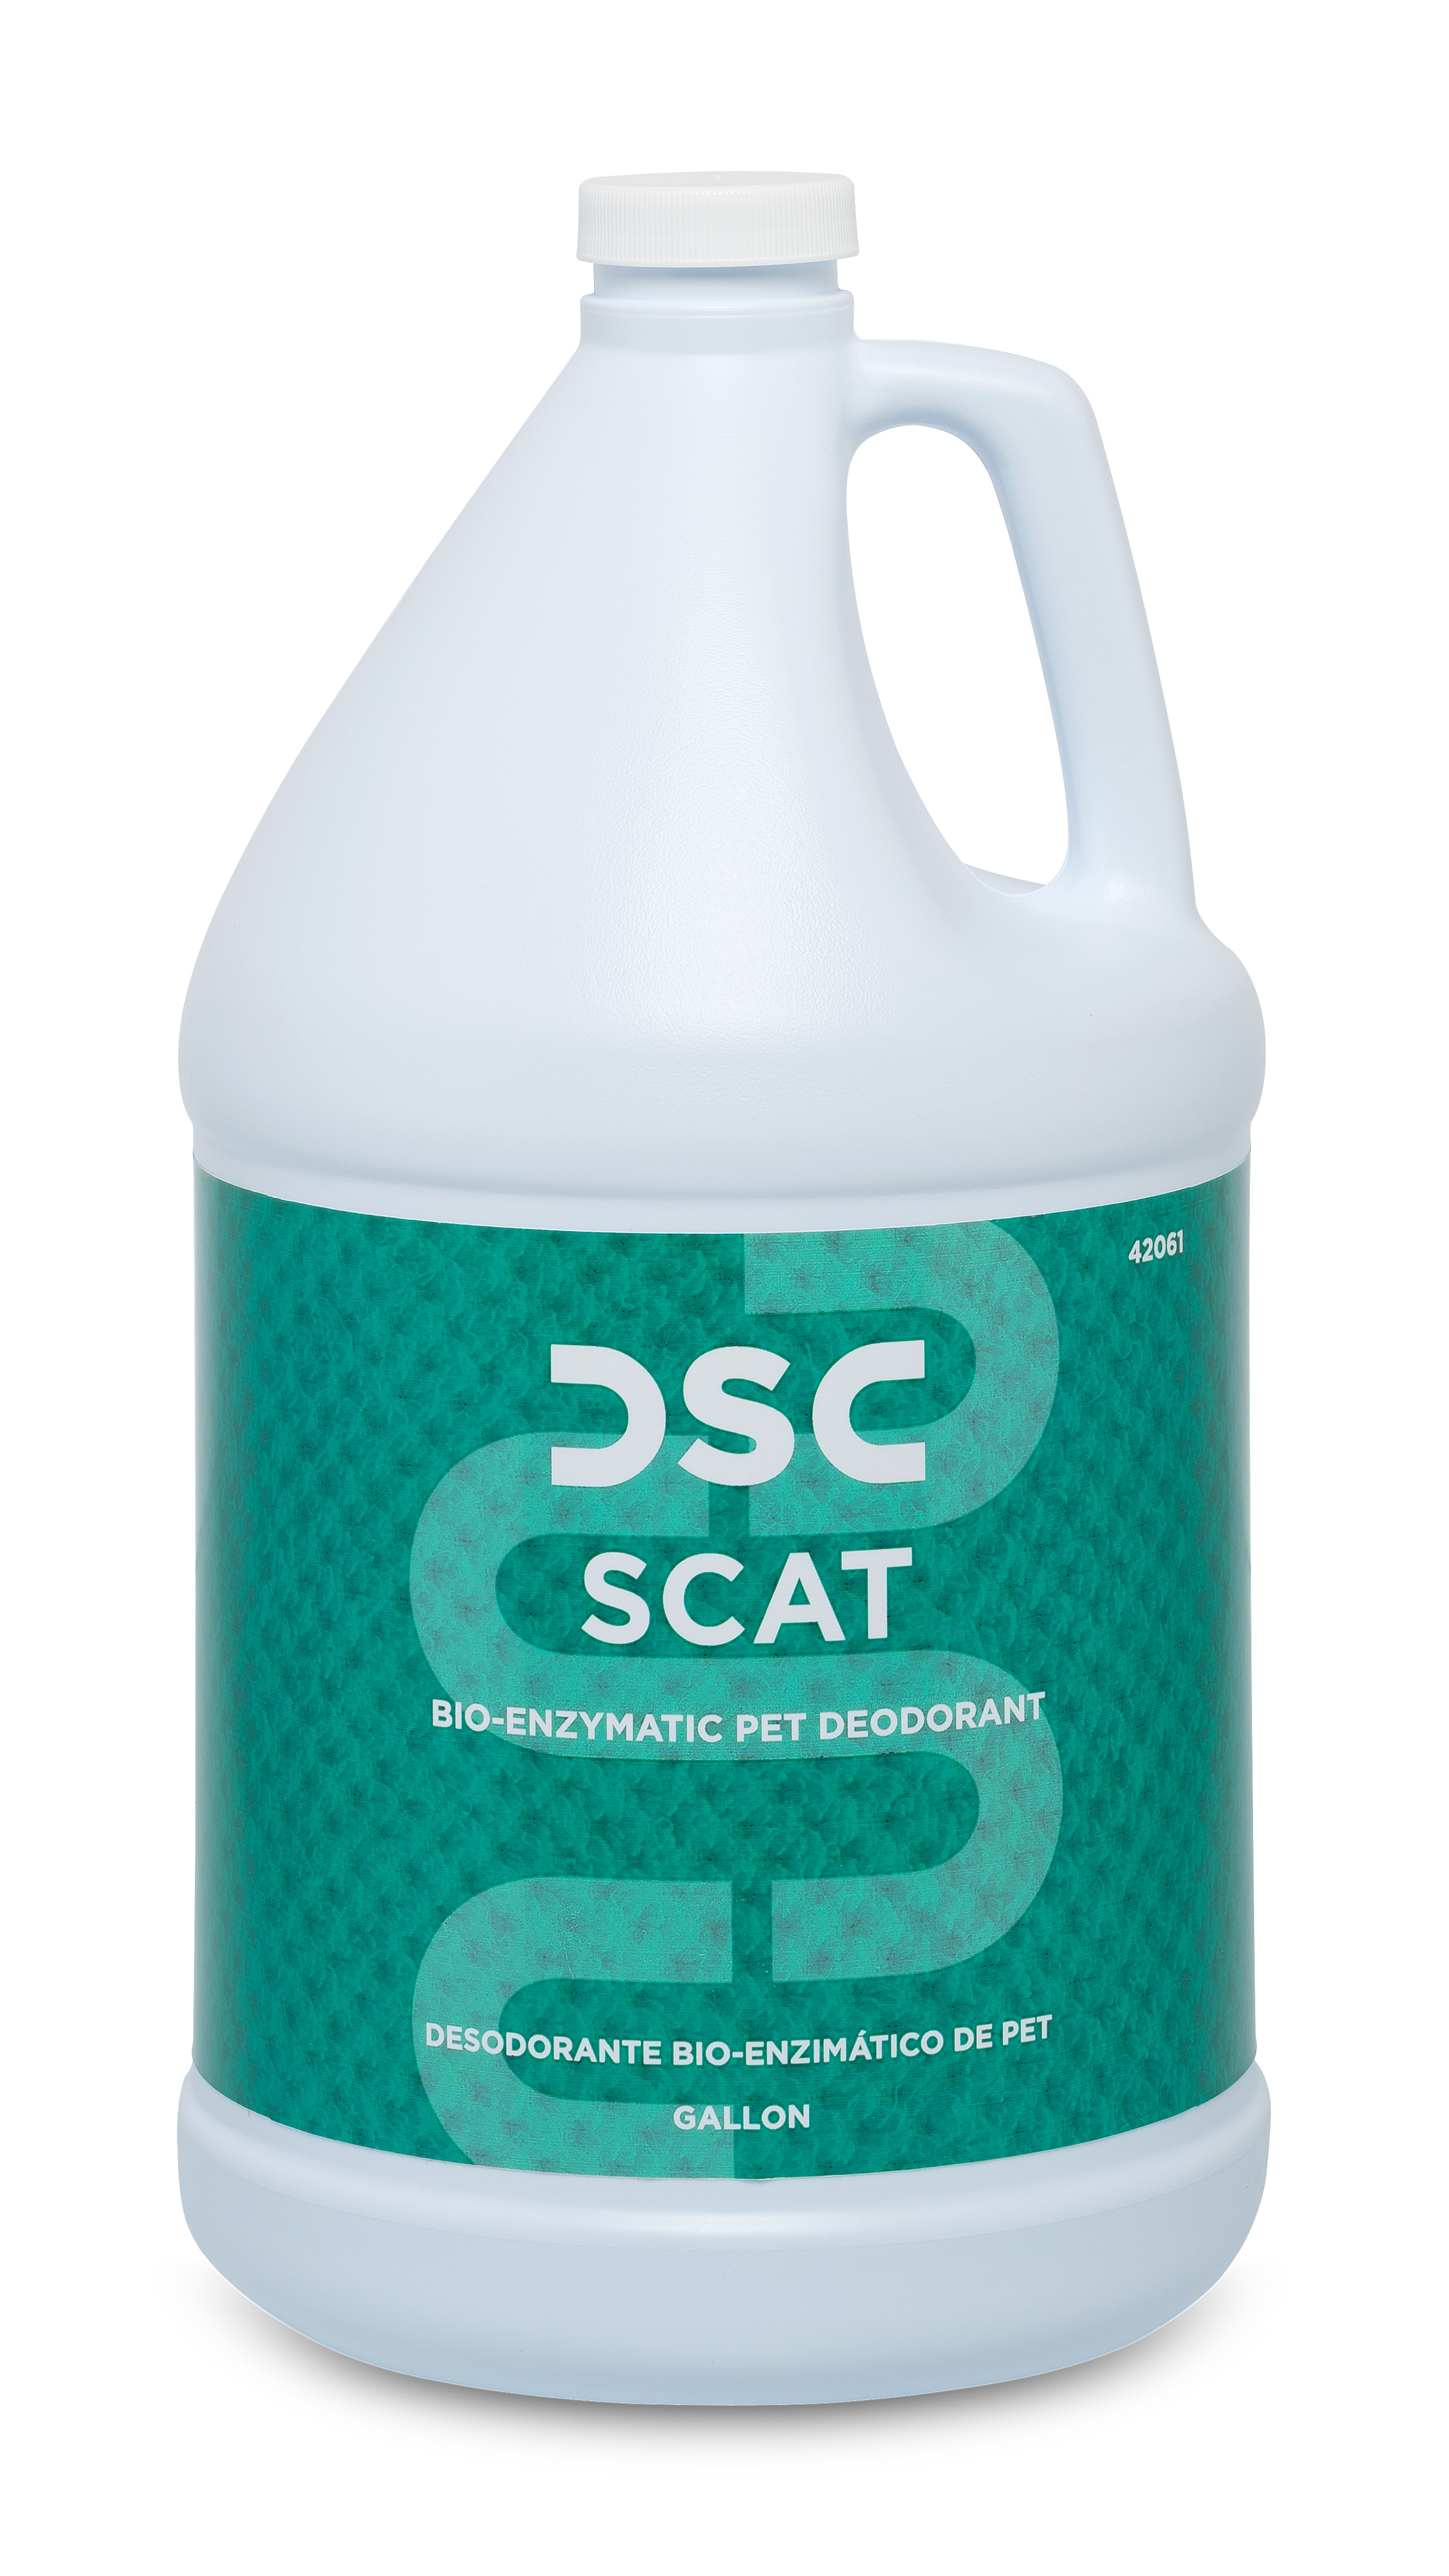 Cleaning solution. ПЭТ дезодорант. Steam Plus. Rinse agent. Solv.